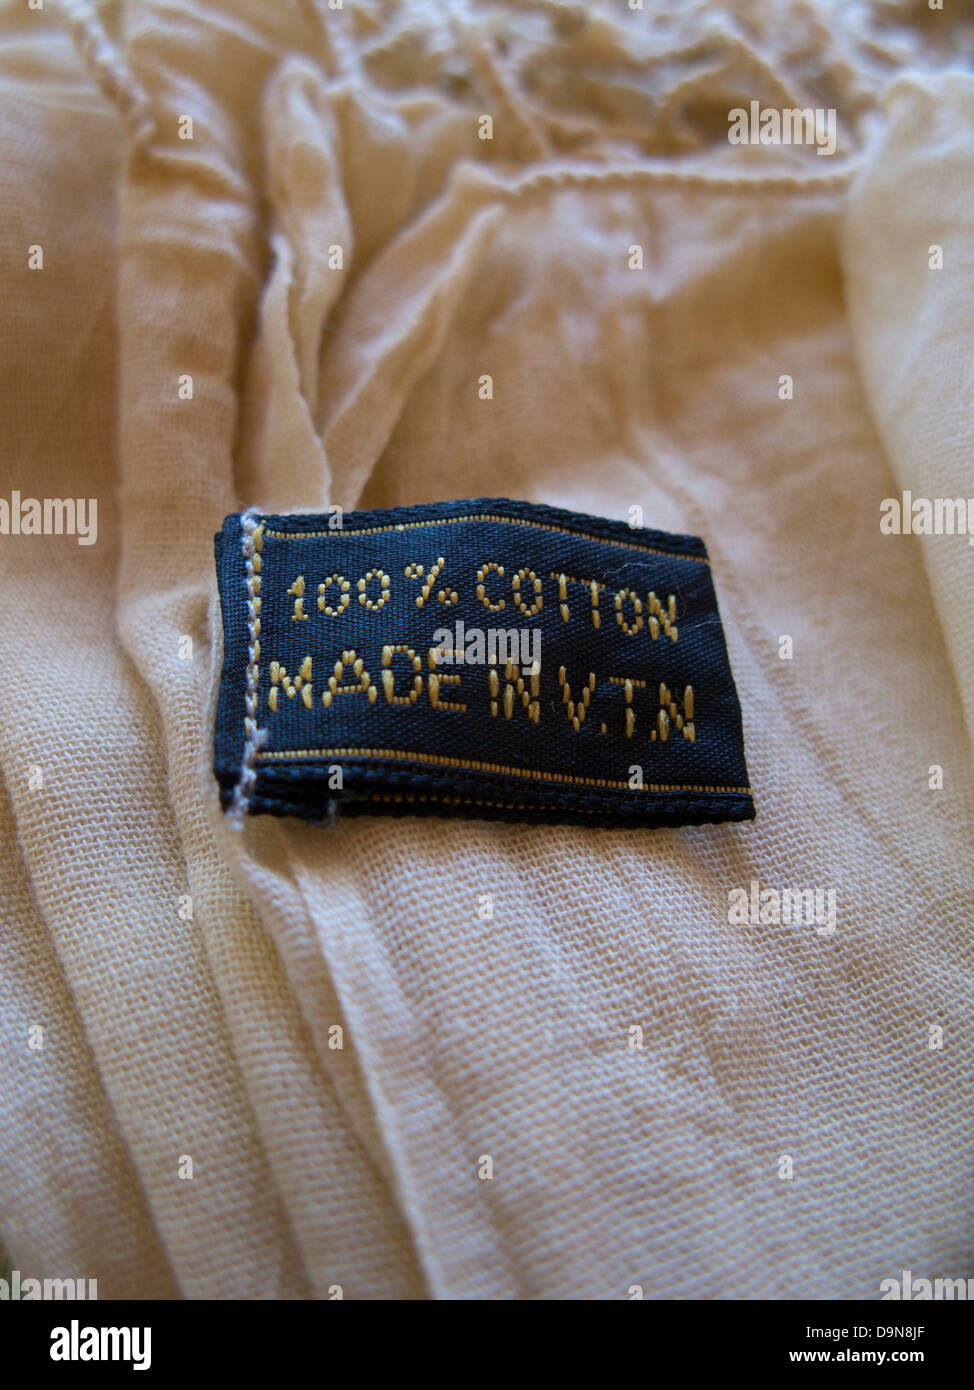 label 100% cotton made in v.t.n.,cotton shirt Stock Photo